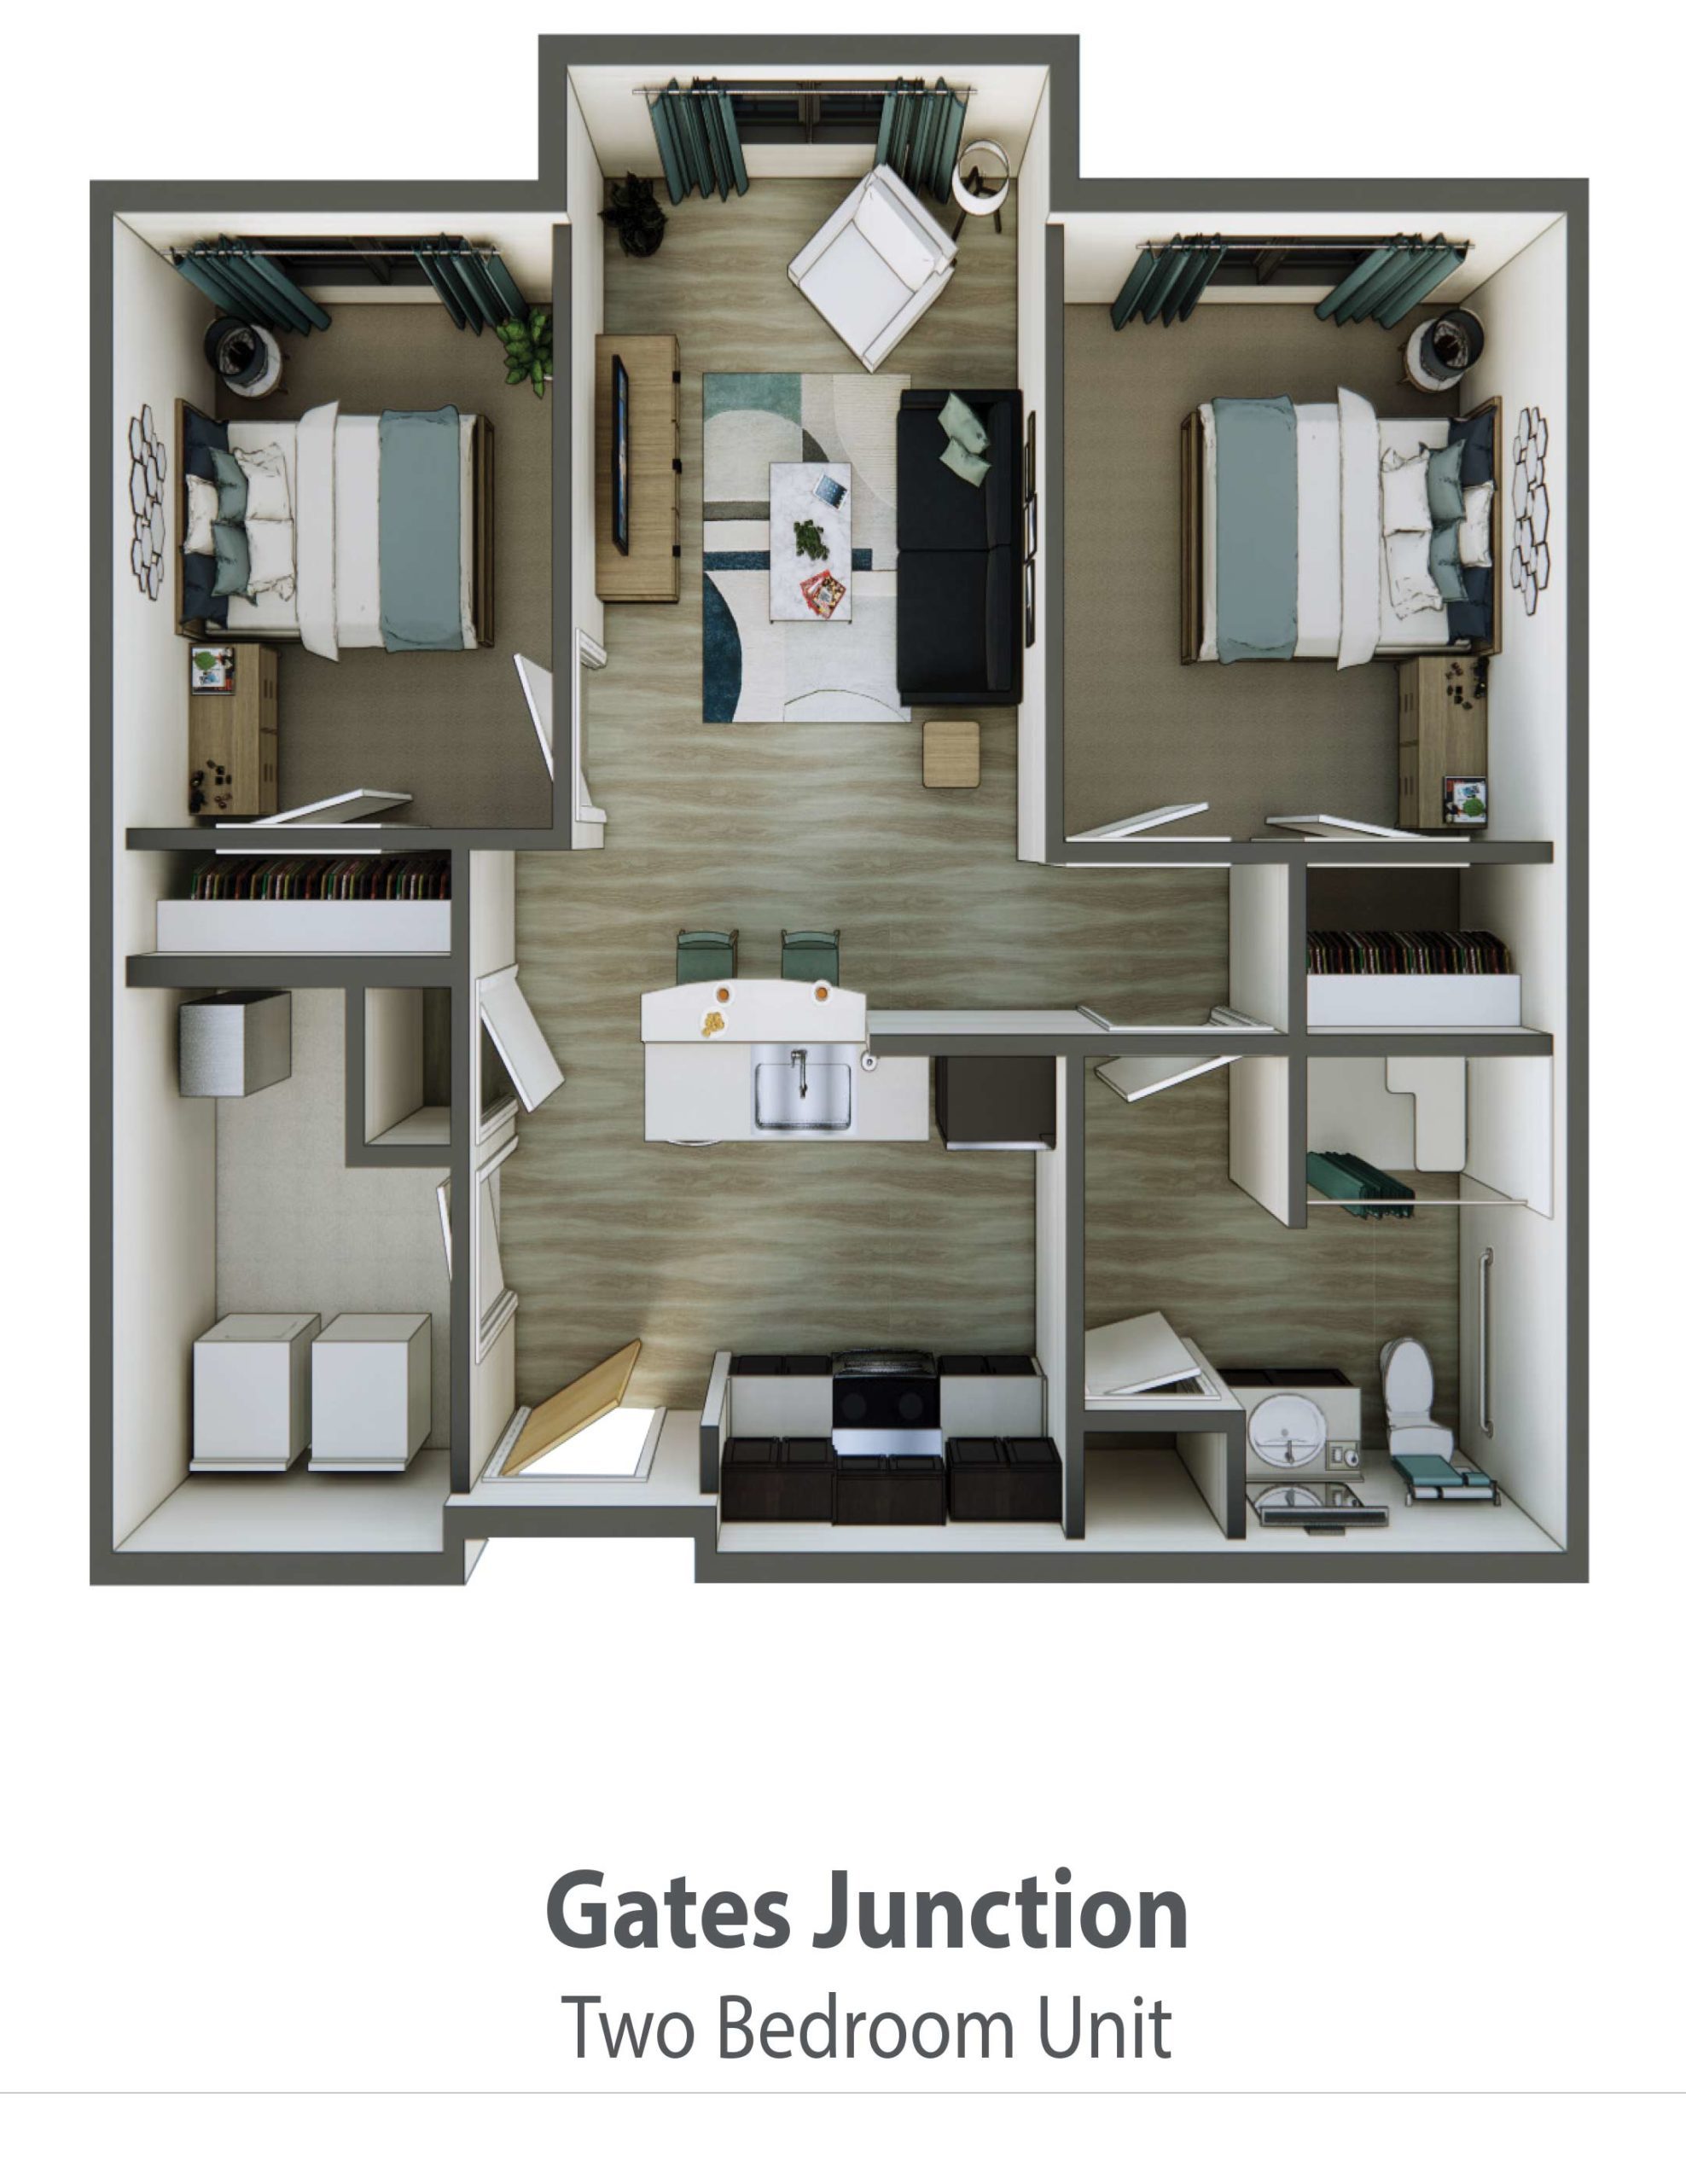 Gates Junction Two Bedroom